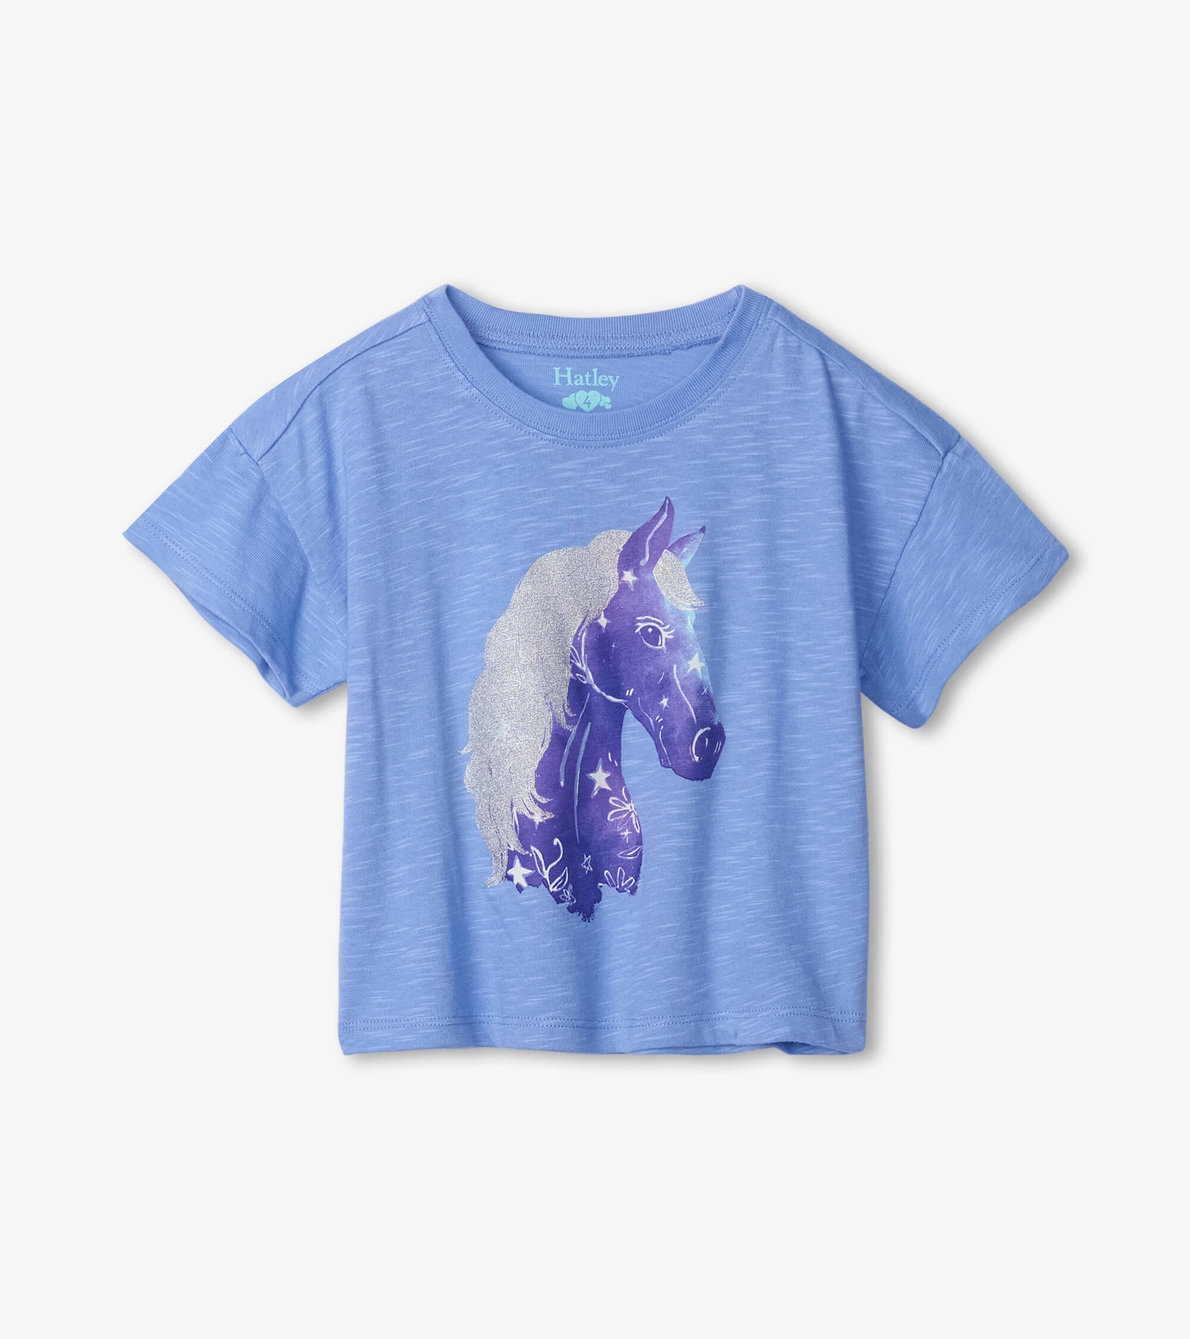 View larger image of Starry Horse Short Sleeve Tee